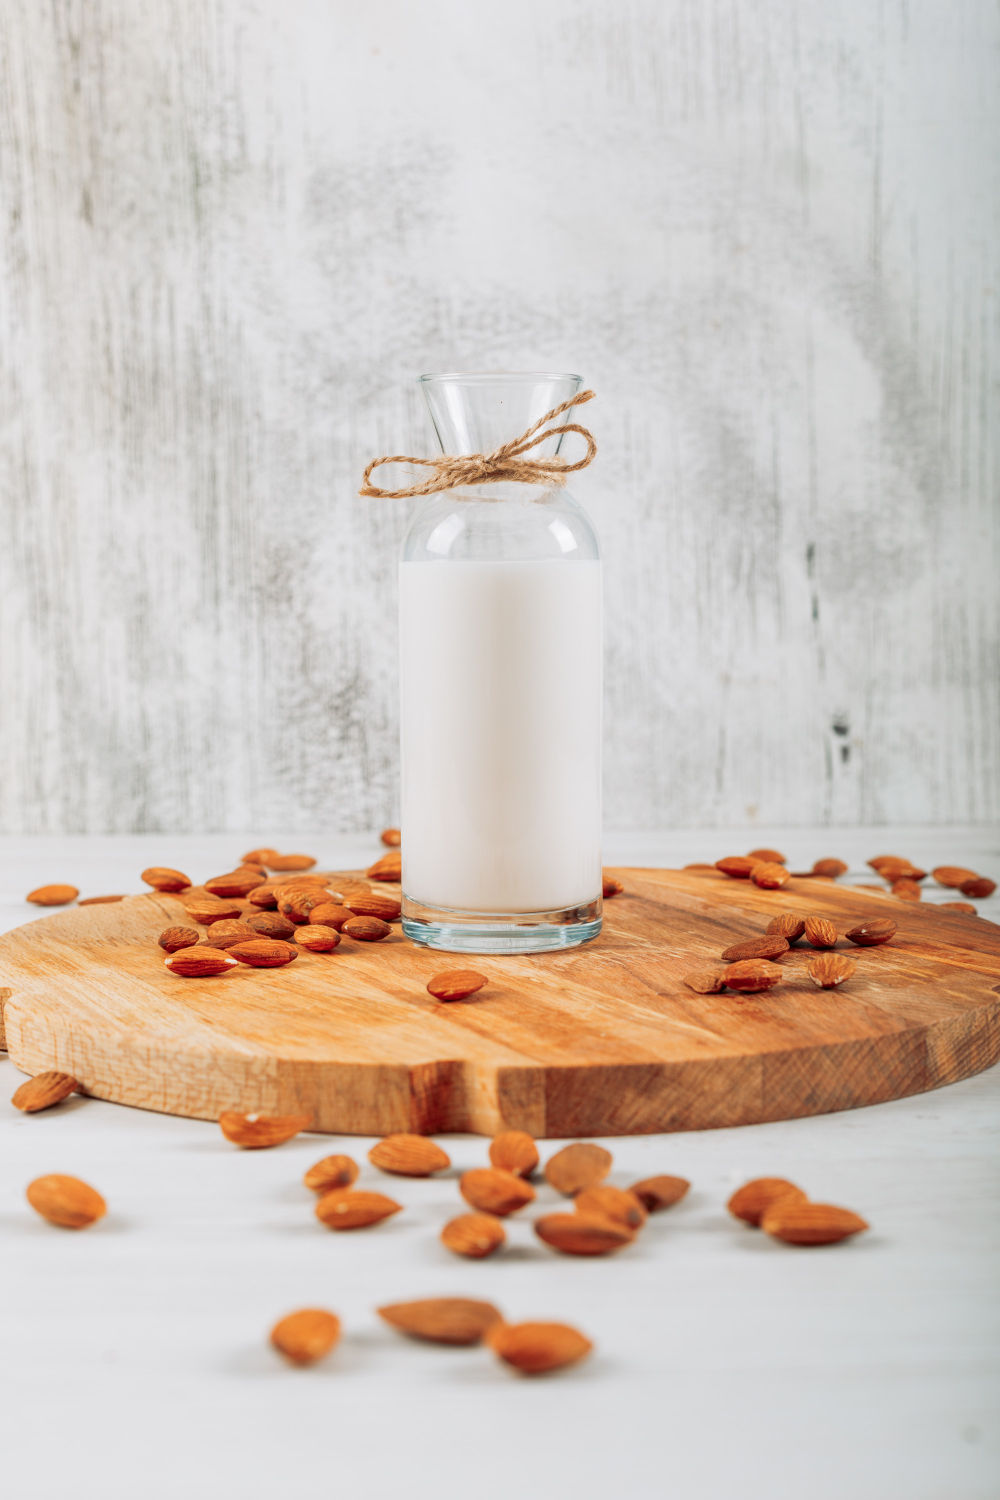 https://allprettybits.com/posts/benefits-of-almond-milk-for-your-skin/image-02-large.jpg